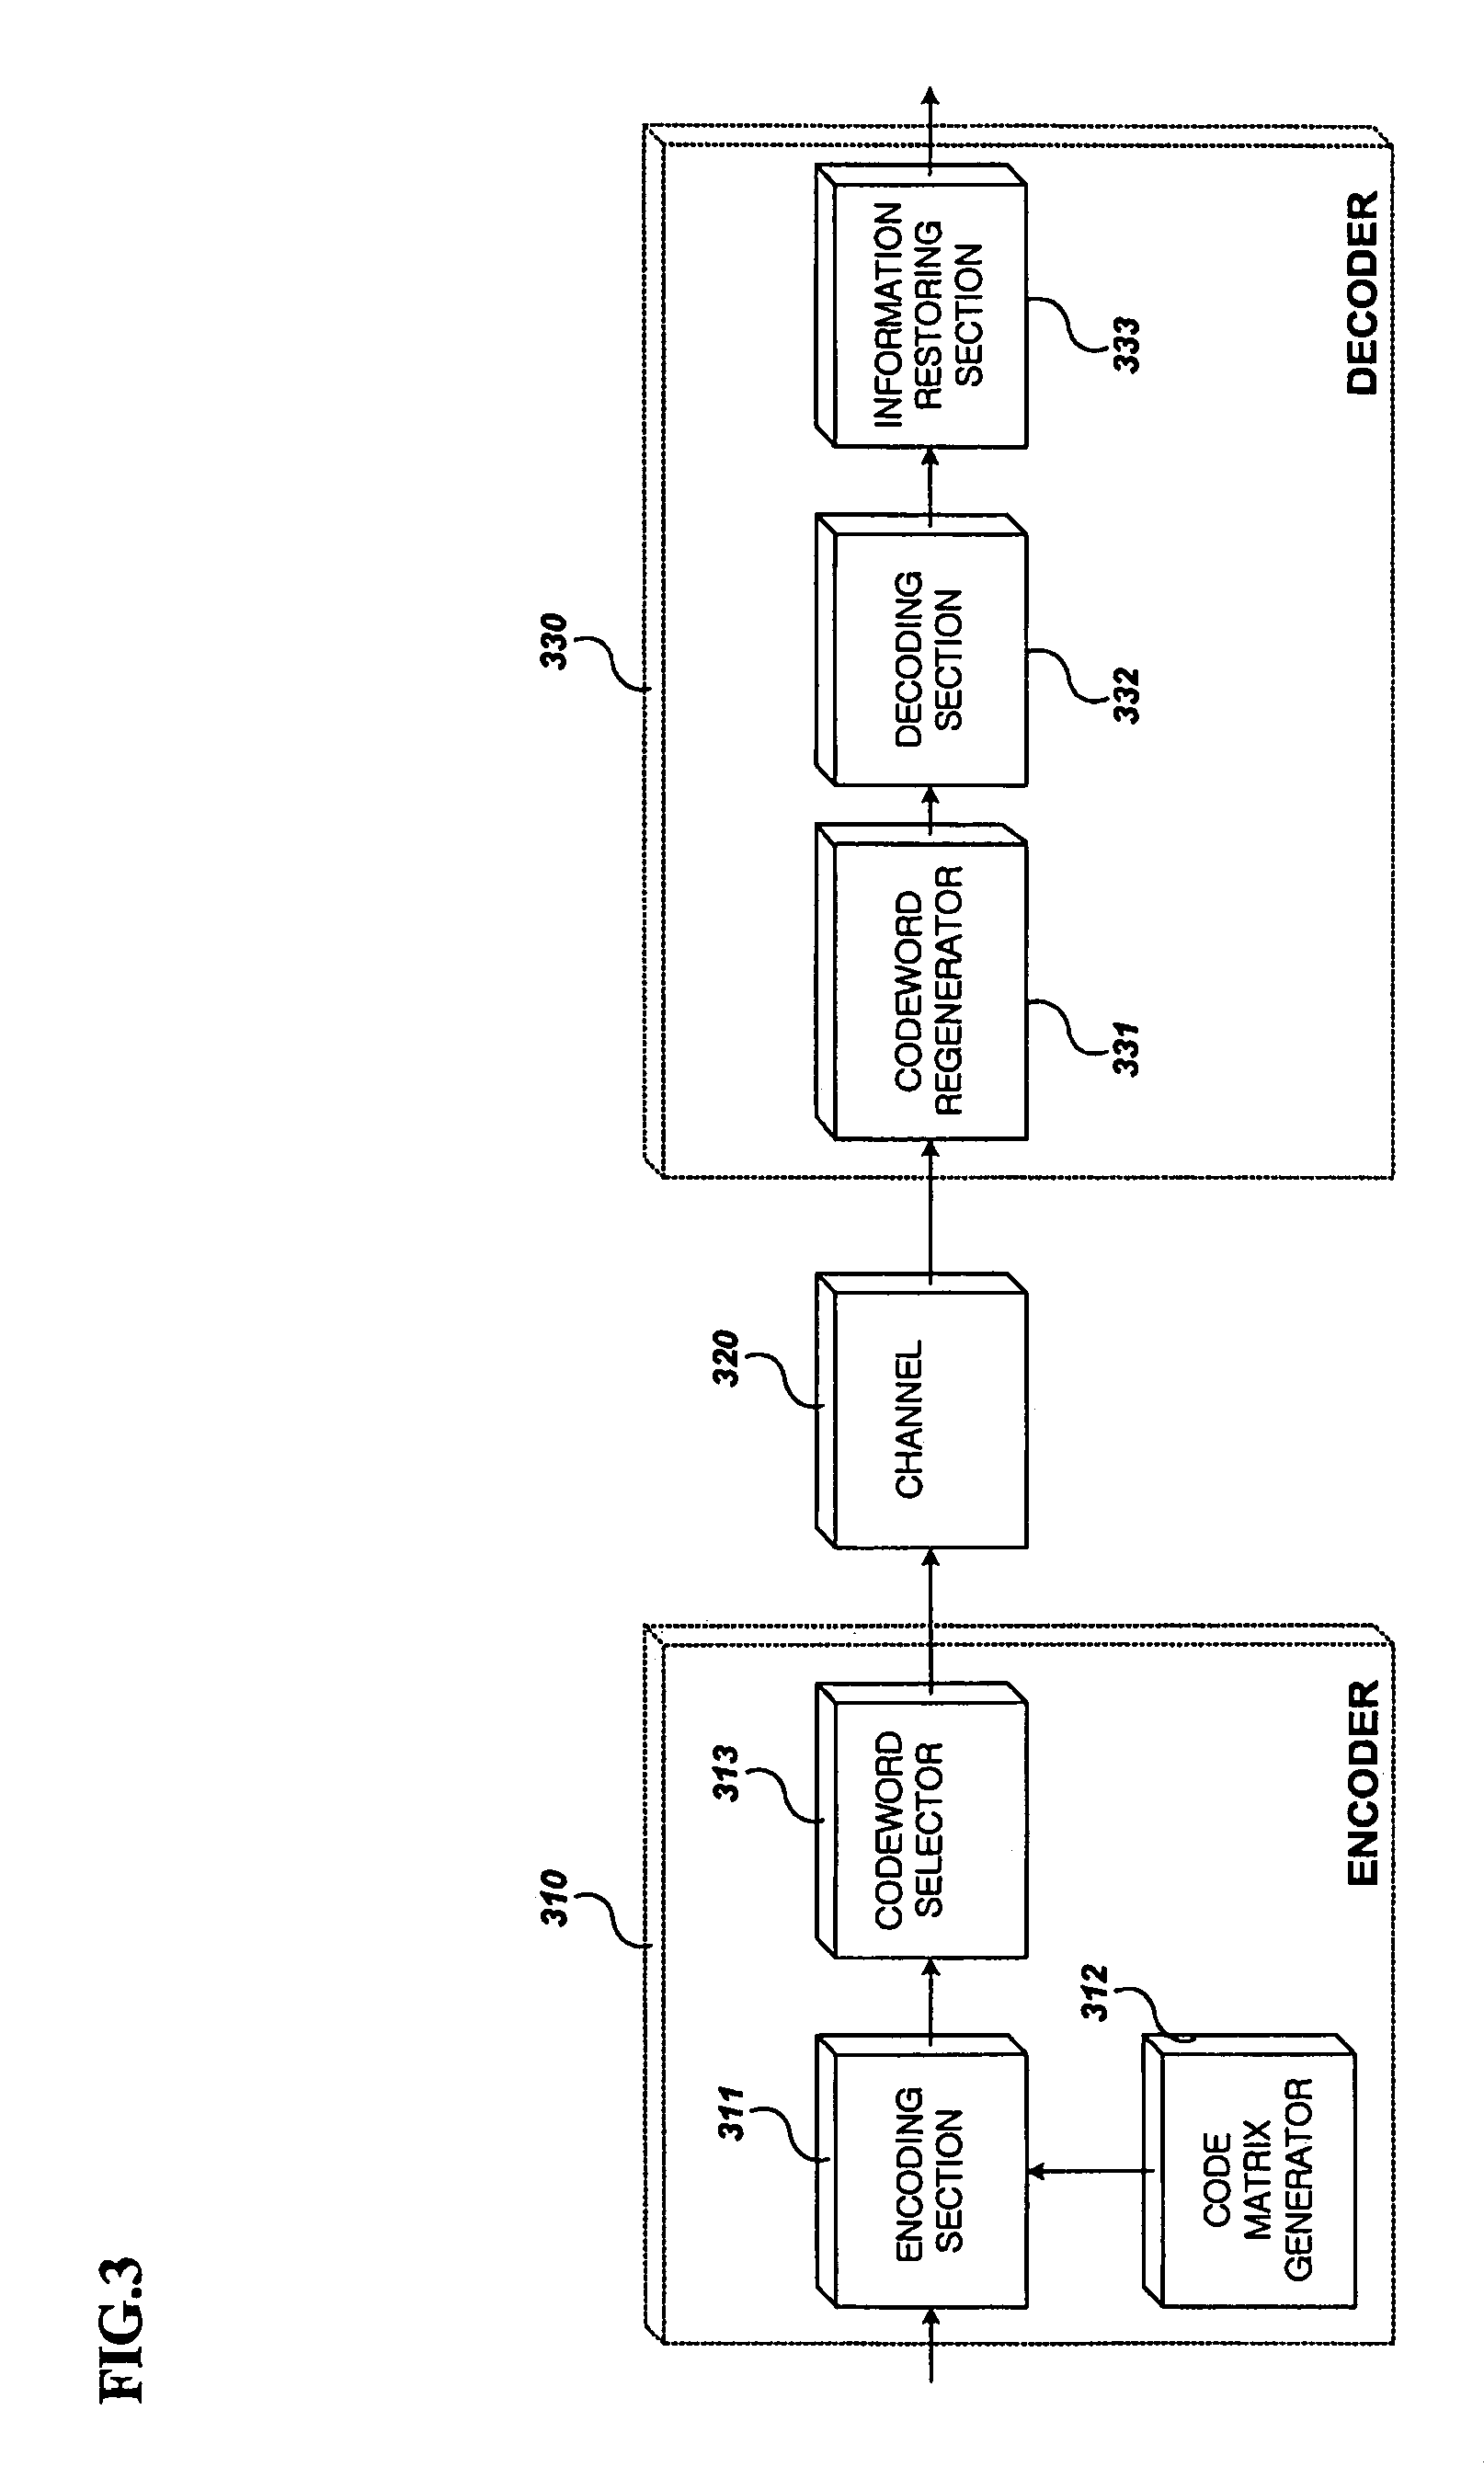 Decoding apparatus for low-density parity-check codes using sequential decoding, and method thereof